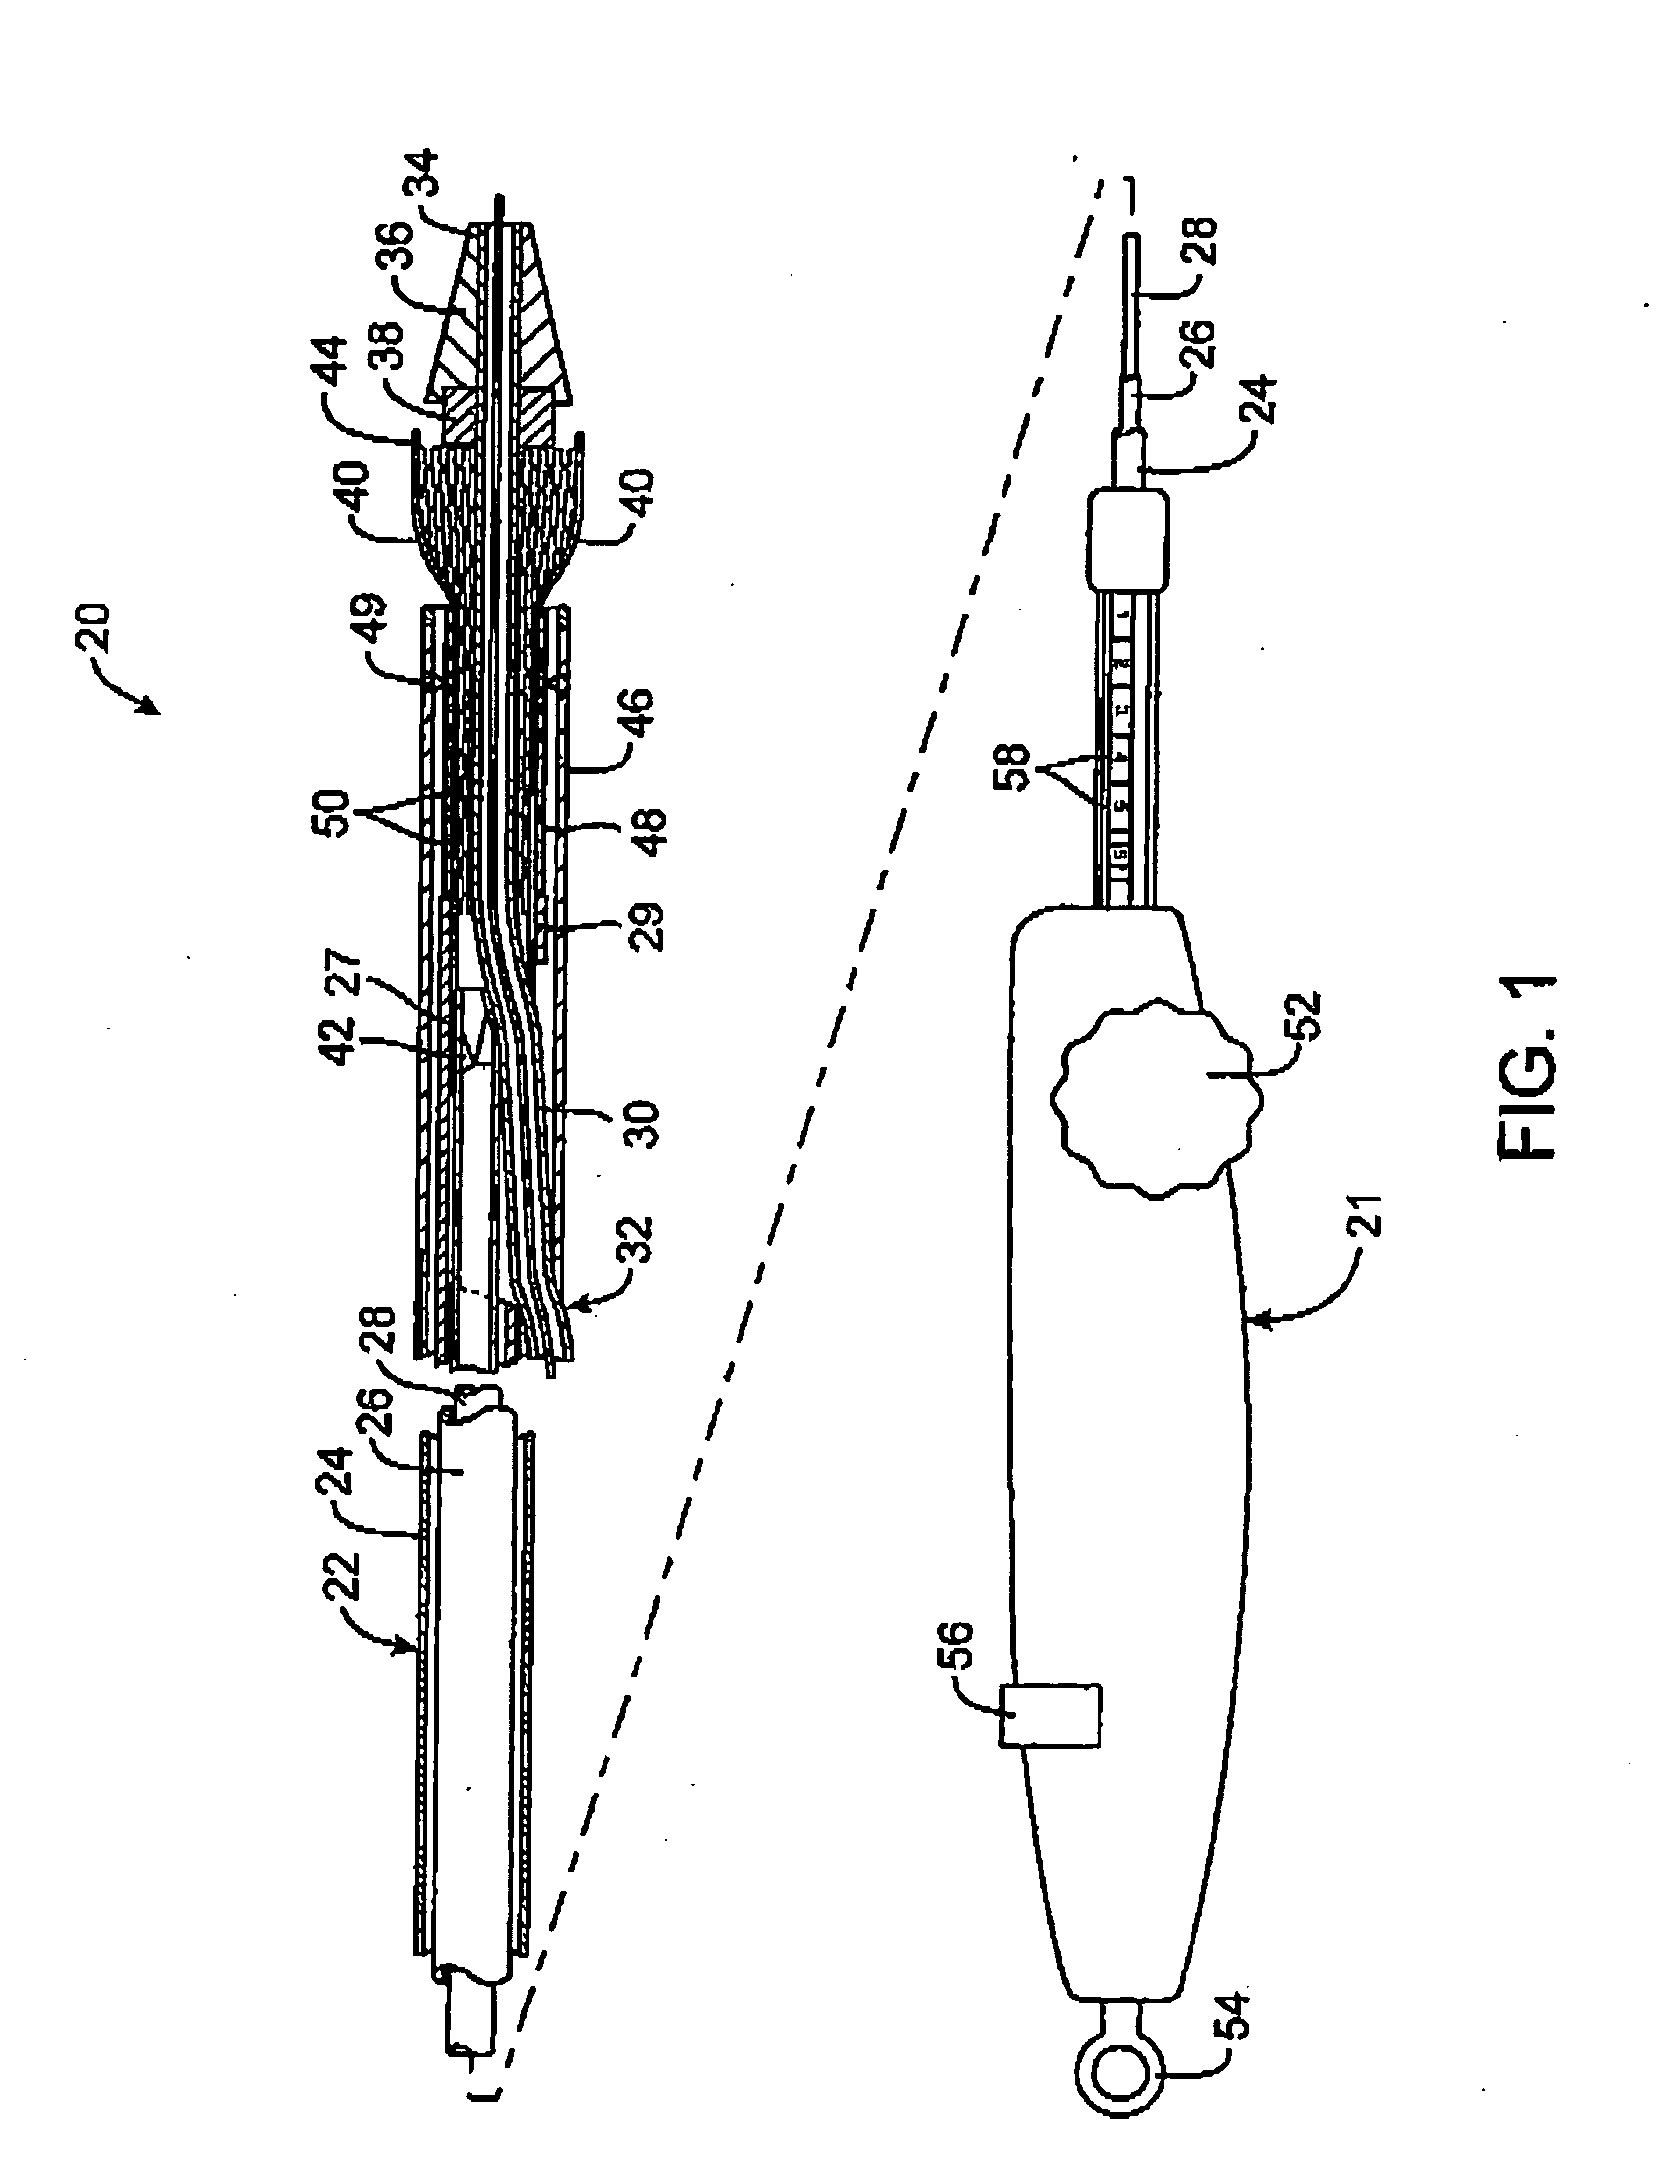 Devices and methods for controlling expandable prostheses during deployment